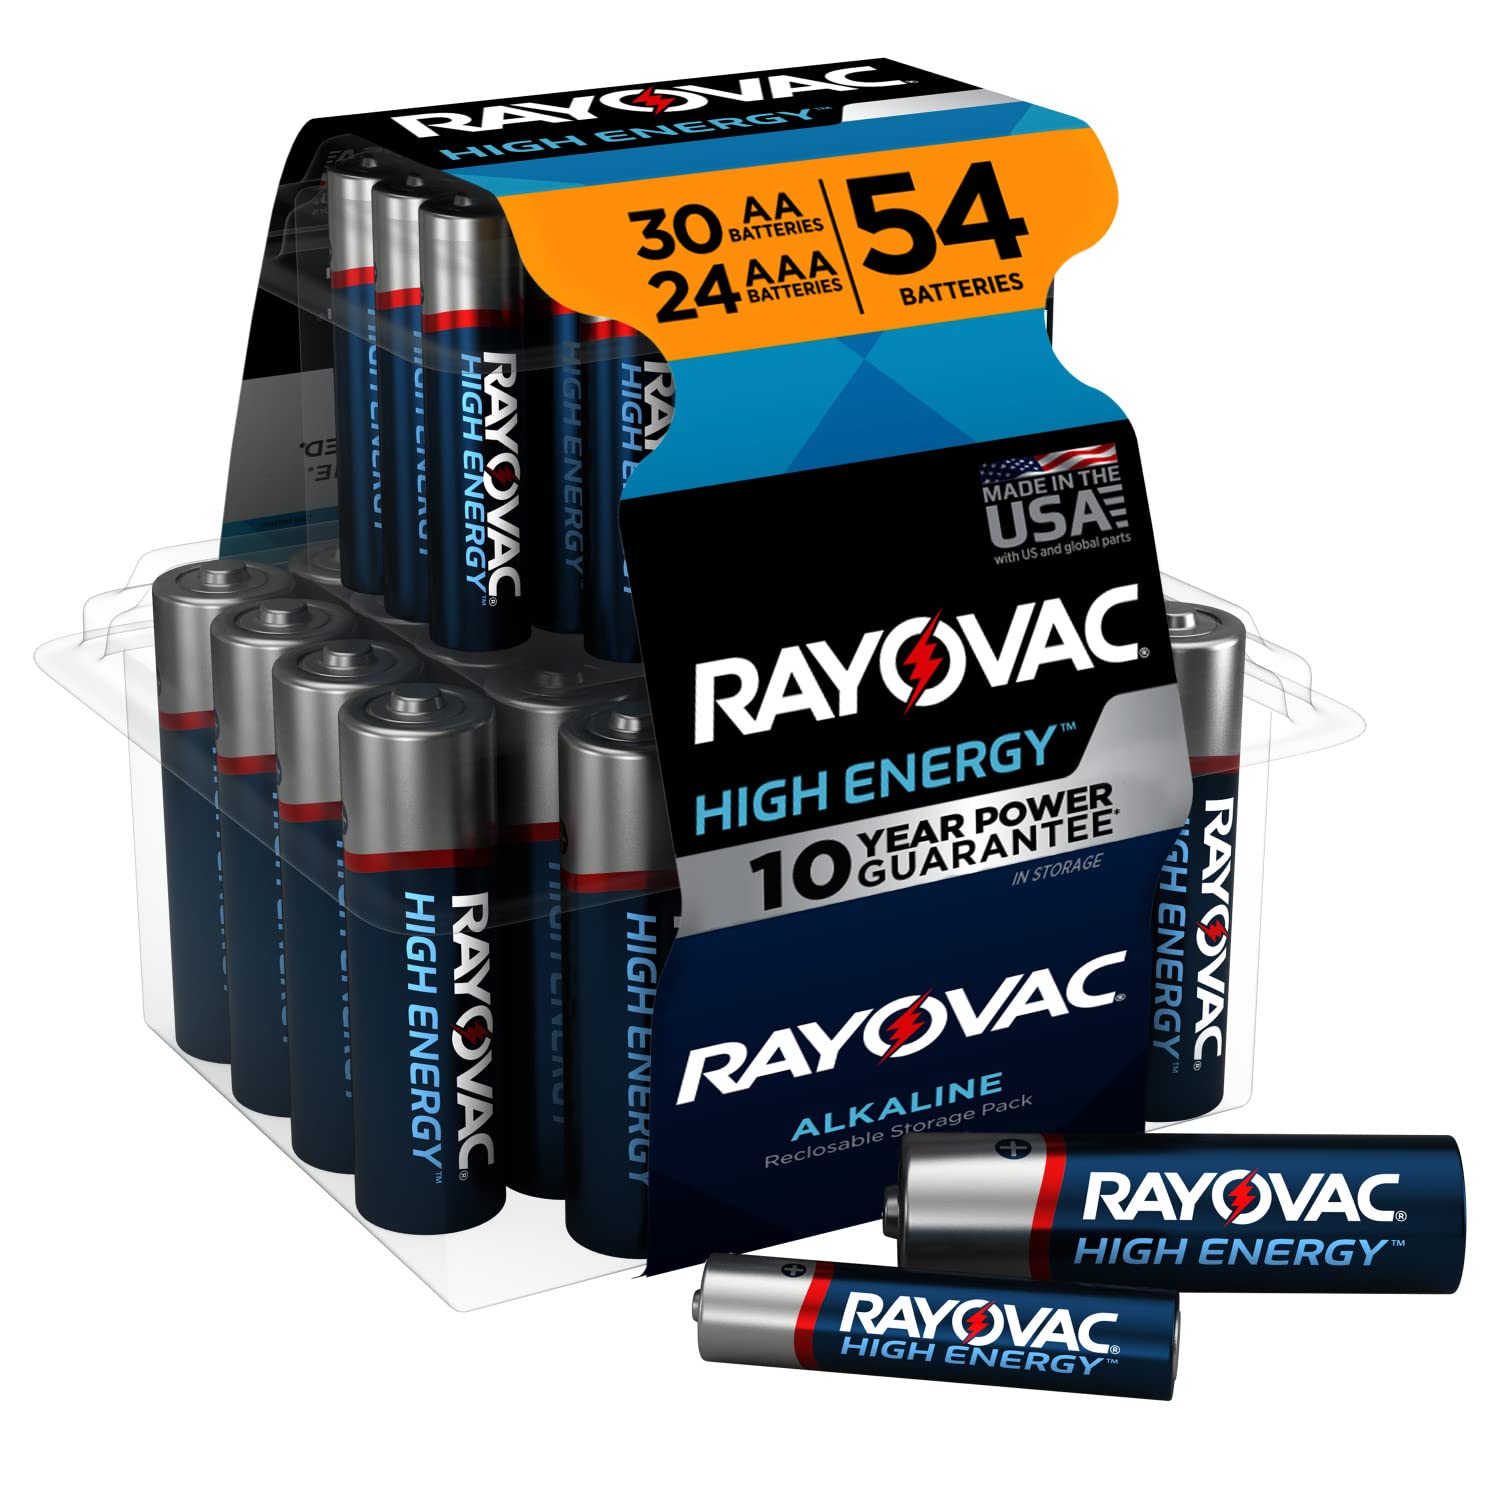 Rayovac AA Batteries & AAA Batteries Variety Pack, 24 Triple A Battery and 30 Double A Battery (54 Count)